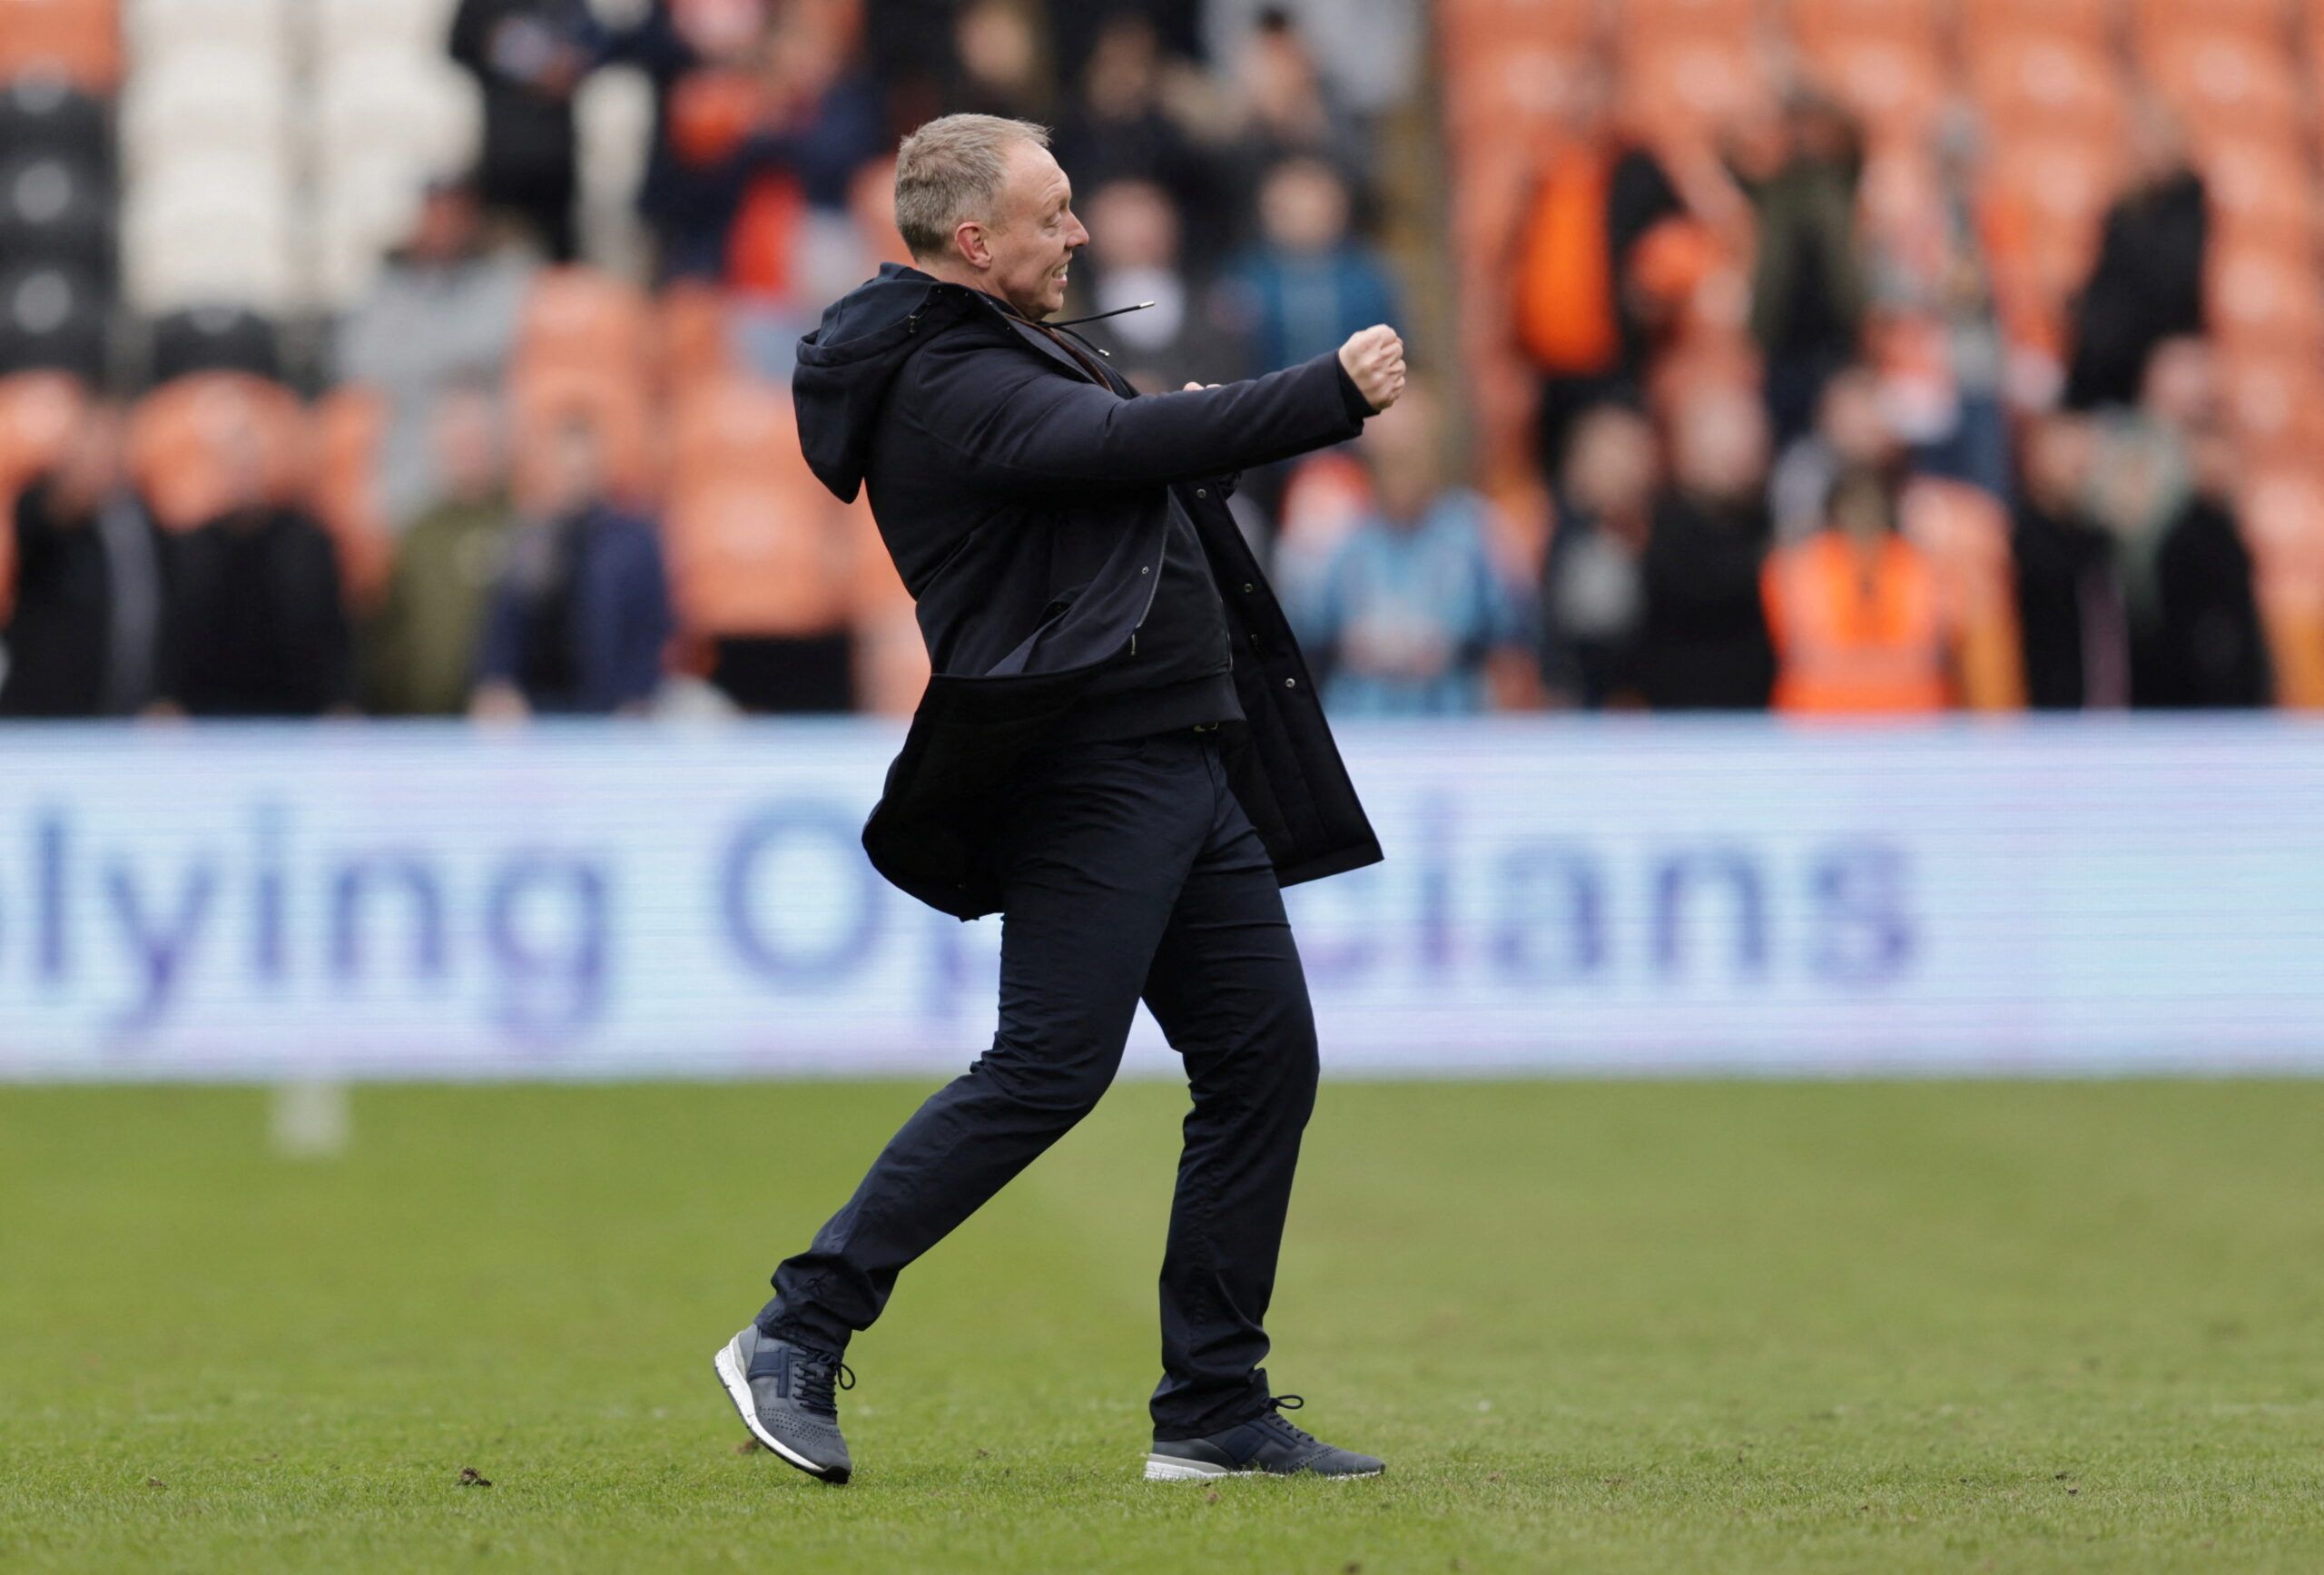 Soccer Football - Championship - Blackpool v Nottingham Forest - Bloomfield Road, Blackpool, Britain - April 2, 2022 Nottingham Forest's manager Steve Cooper celebrates after the match    Action Images/John Clifton  EDITORIAL USE ONLY. No use with unauthorized audio, video, data, fixture lists, club/league logos or 